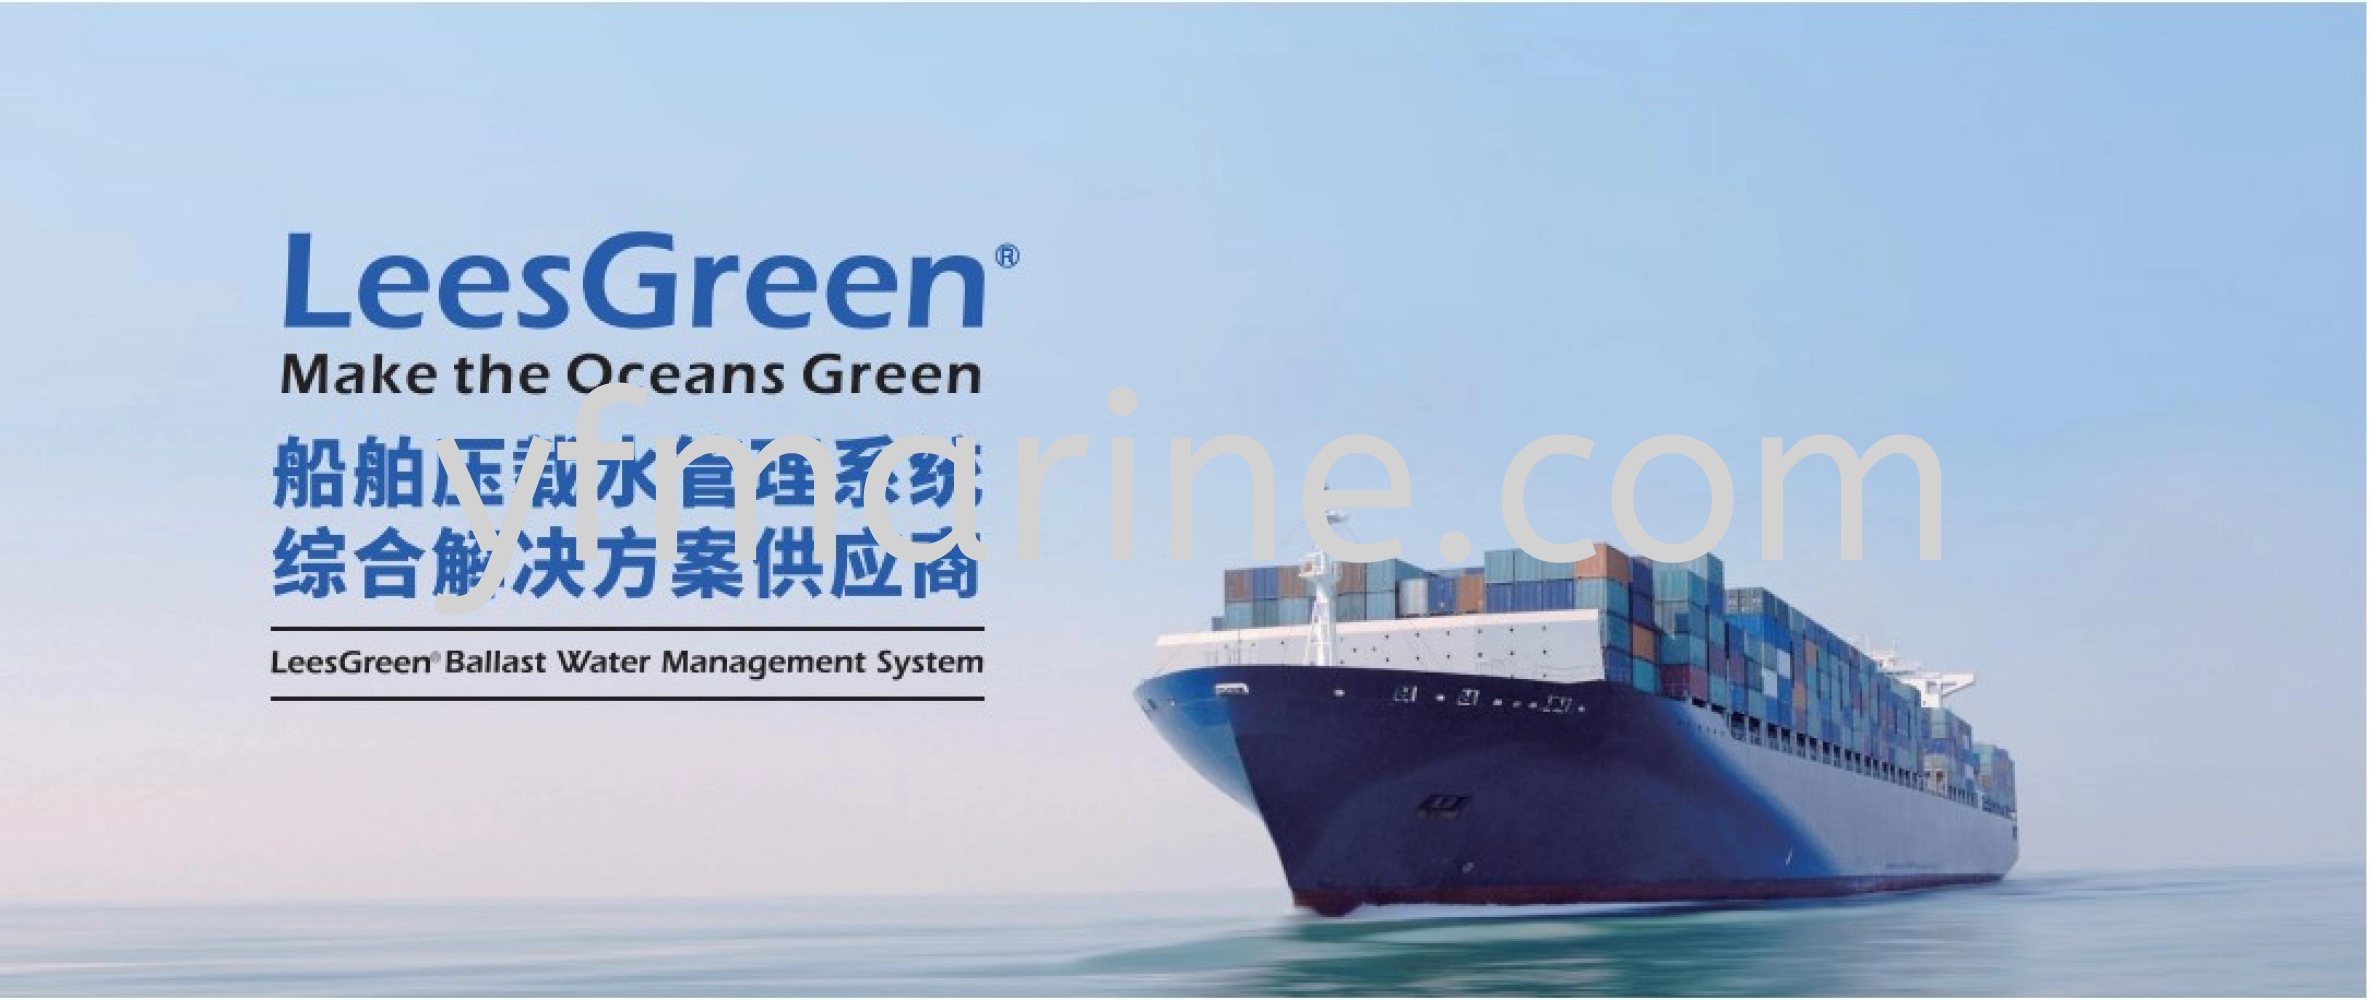 LeesGreen - IMO Approved Ballast Water Management system